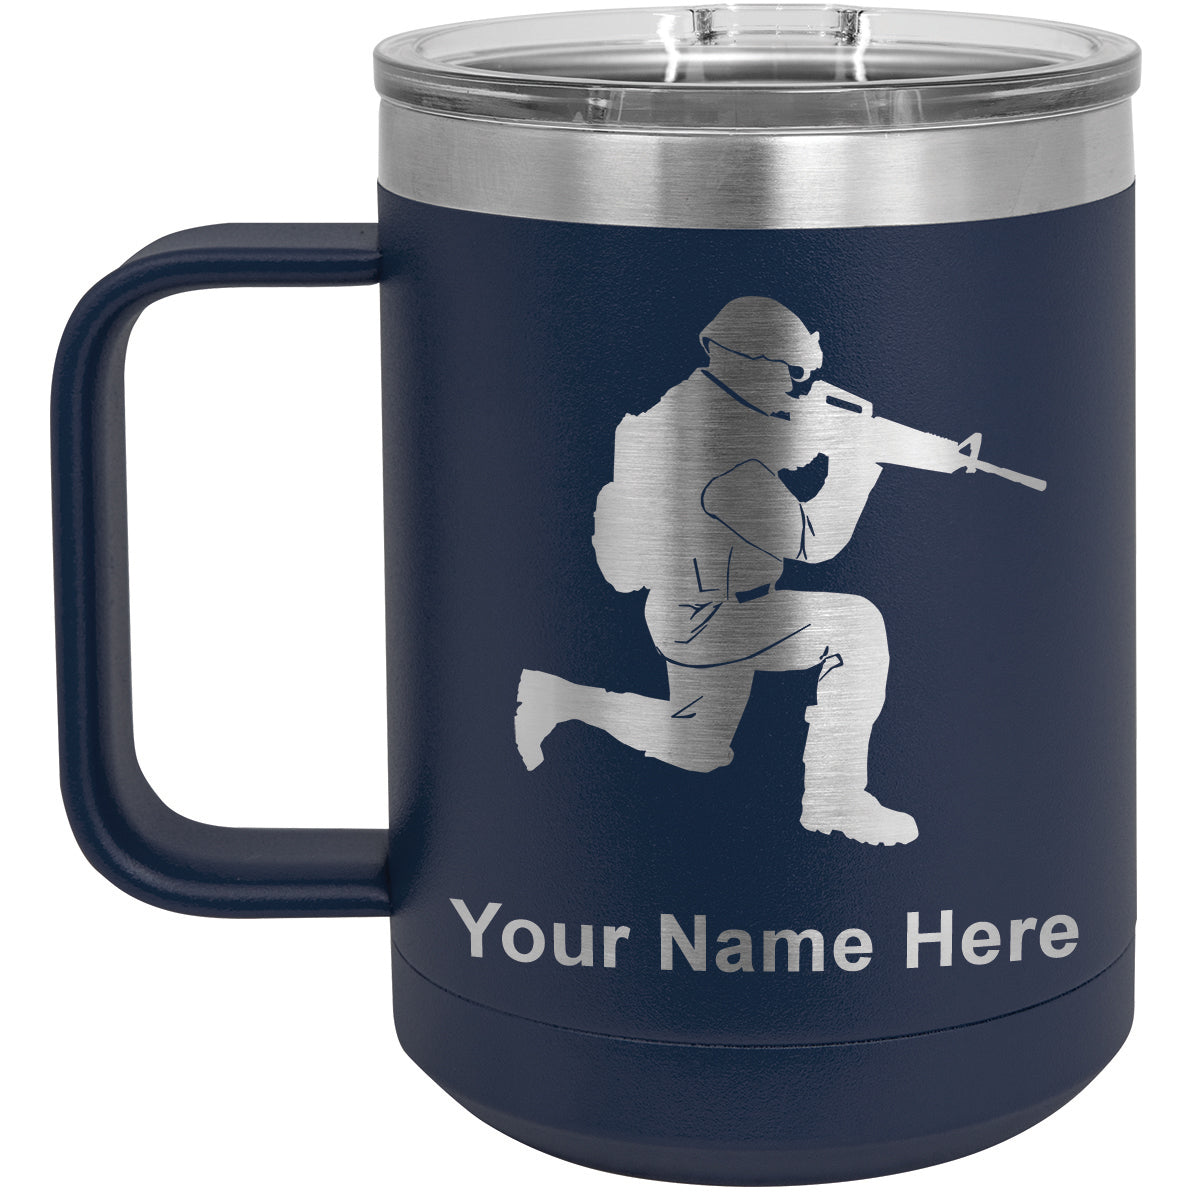 15oz Vacuum Insulated Coffee Mug, Military Soldier, Personalized Engraving Included